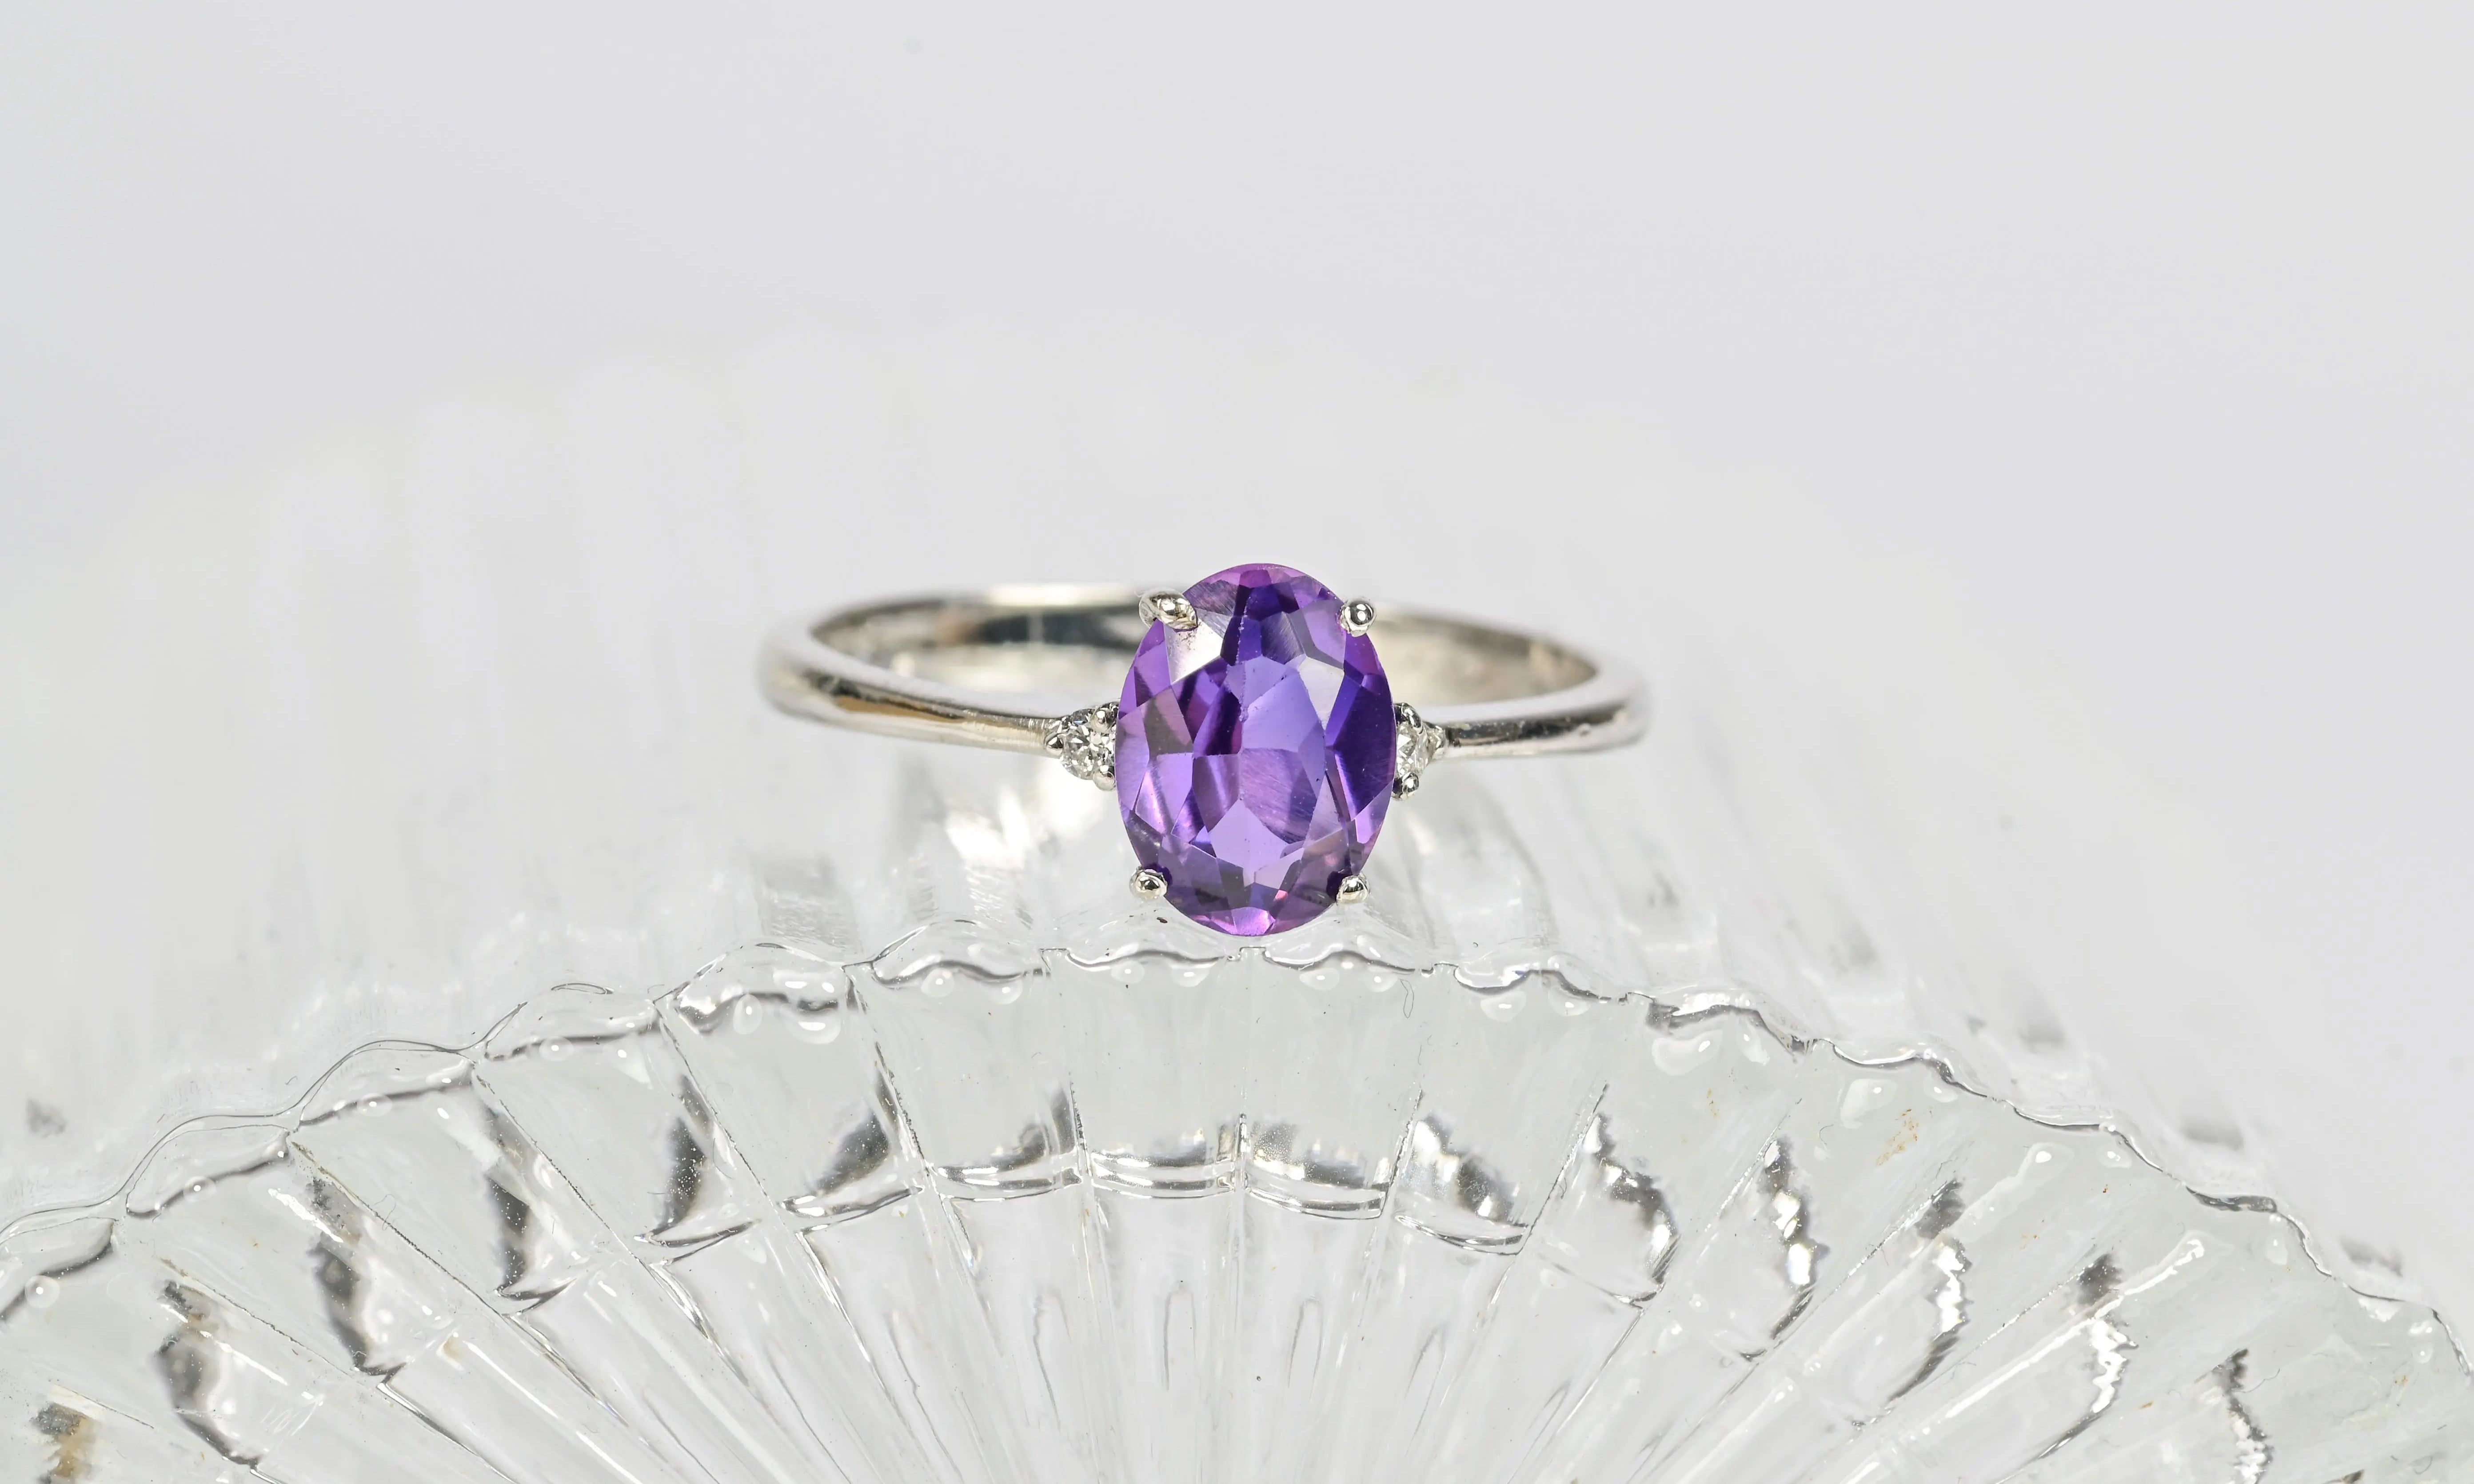 Antique engagement ring with a central amethyst stone and surrounding diamonds